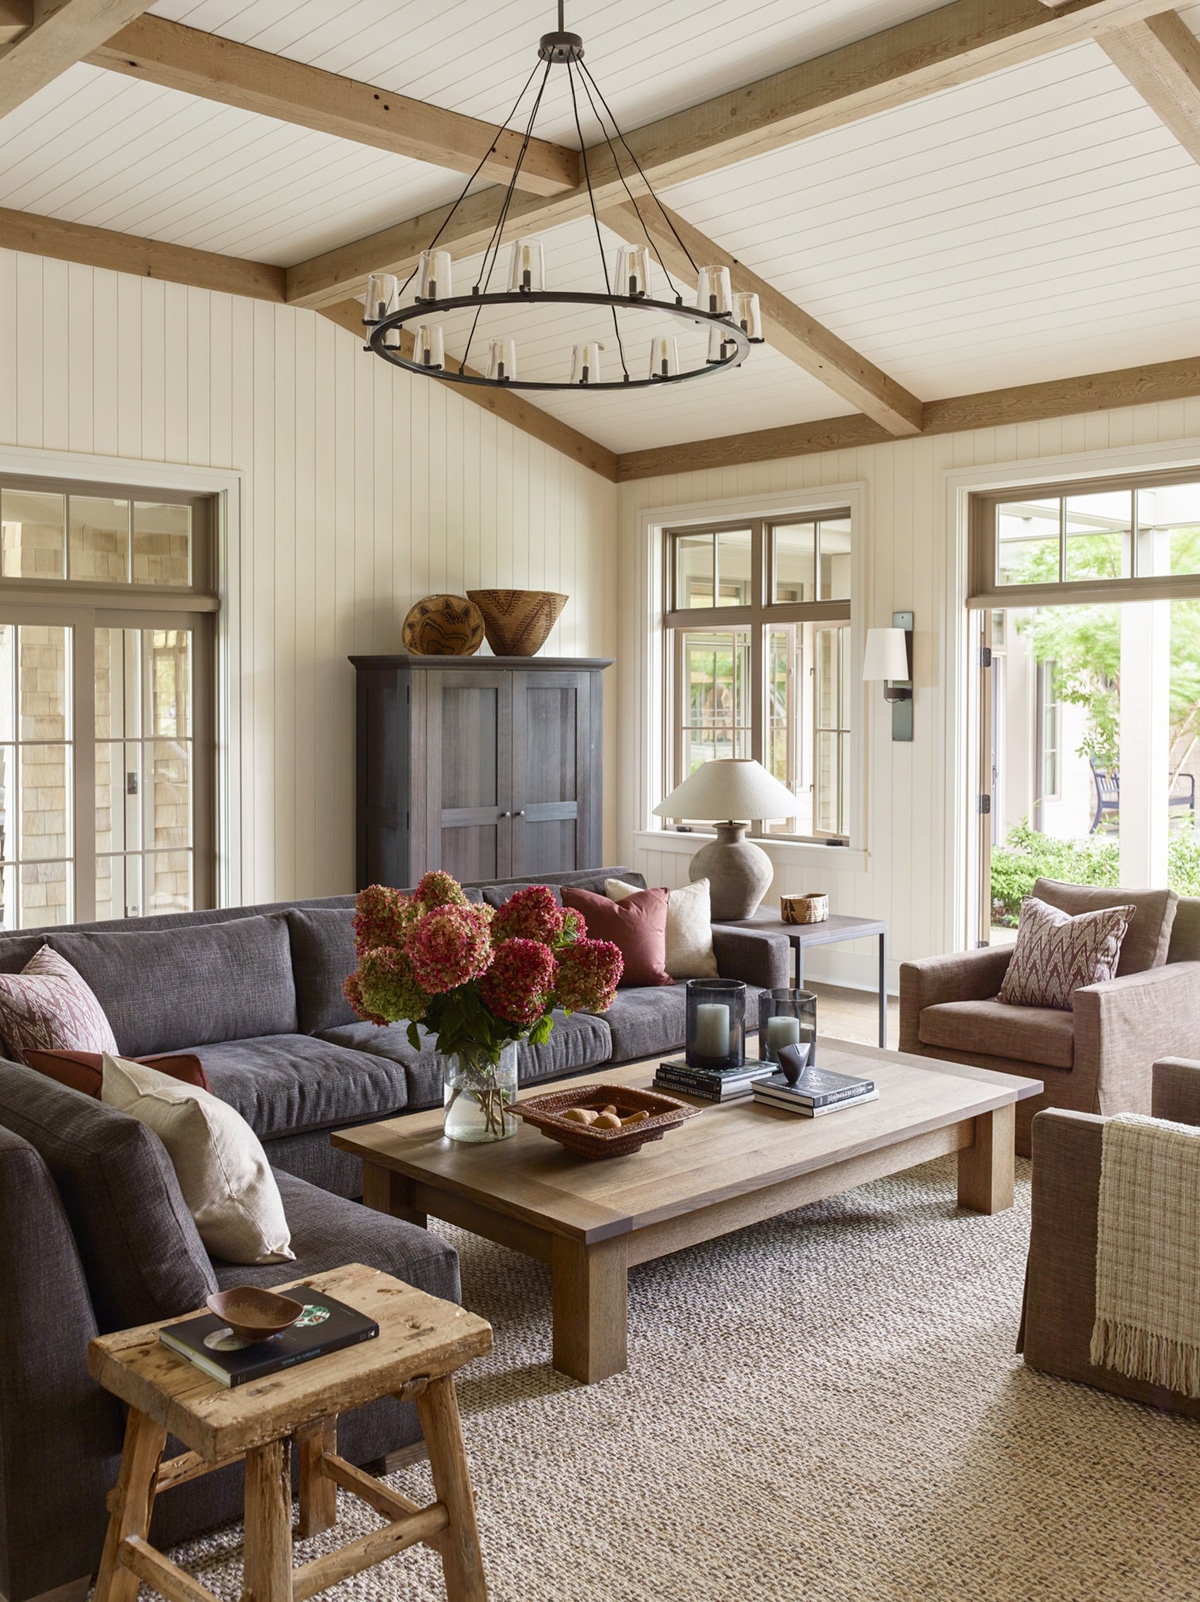 traditional pacific northwest style in a cozy neutral living room | coco kelley